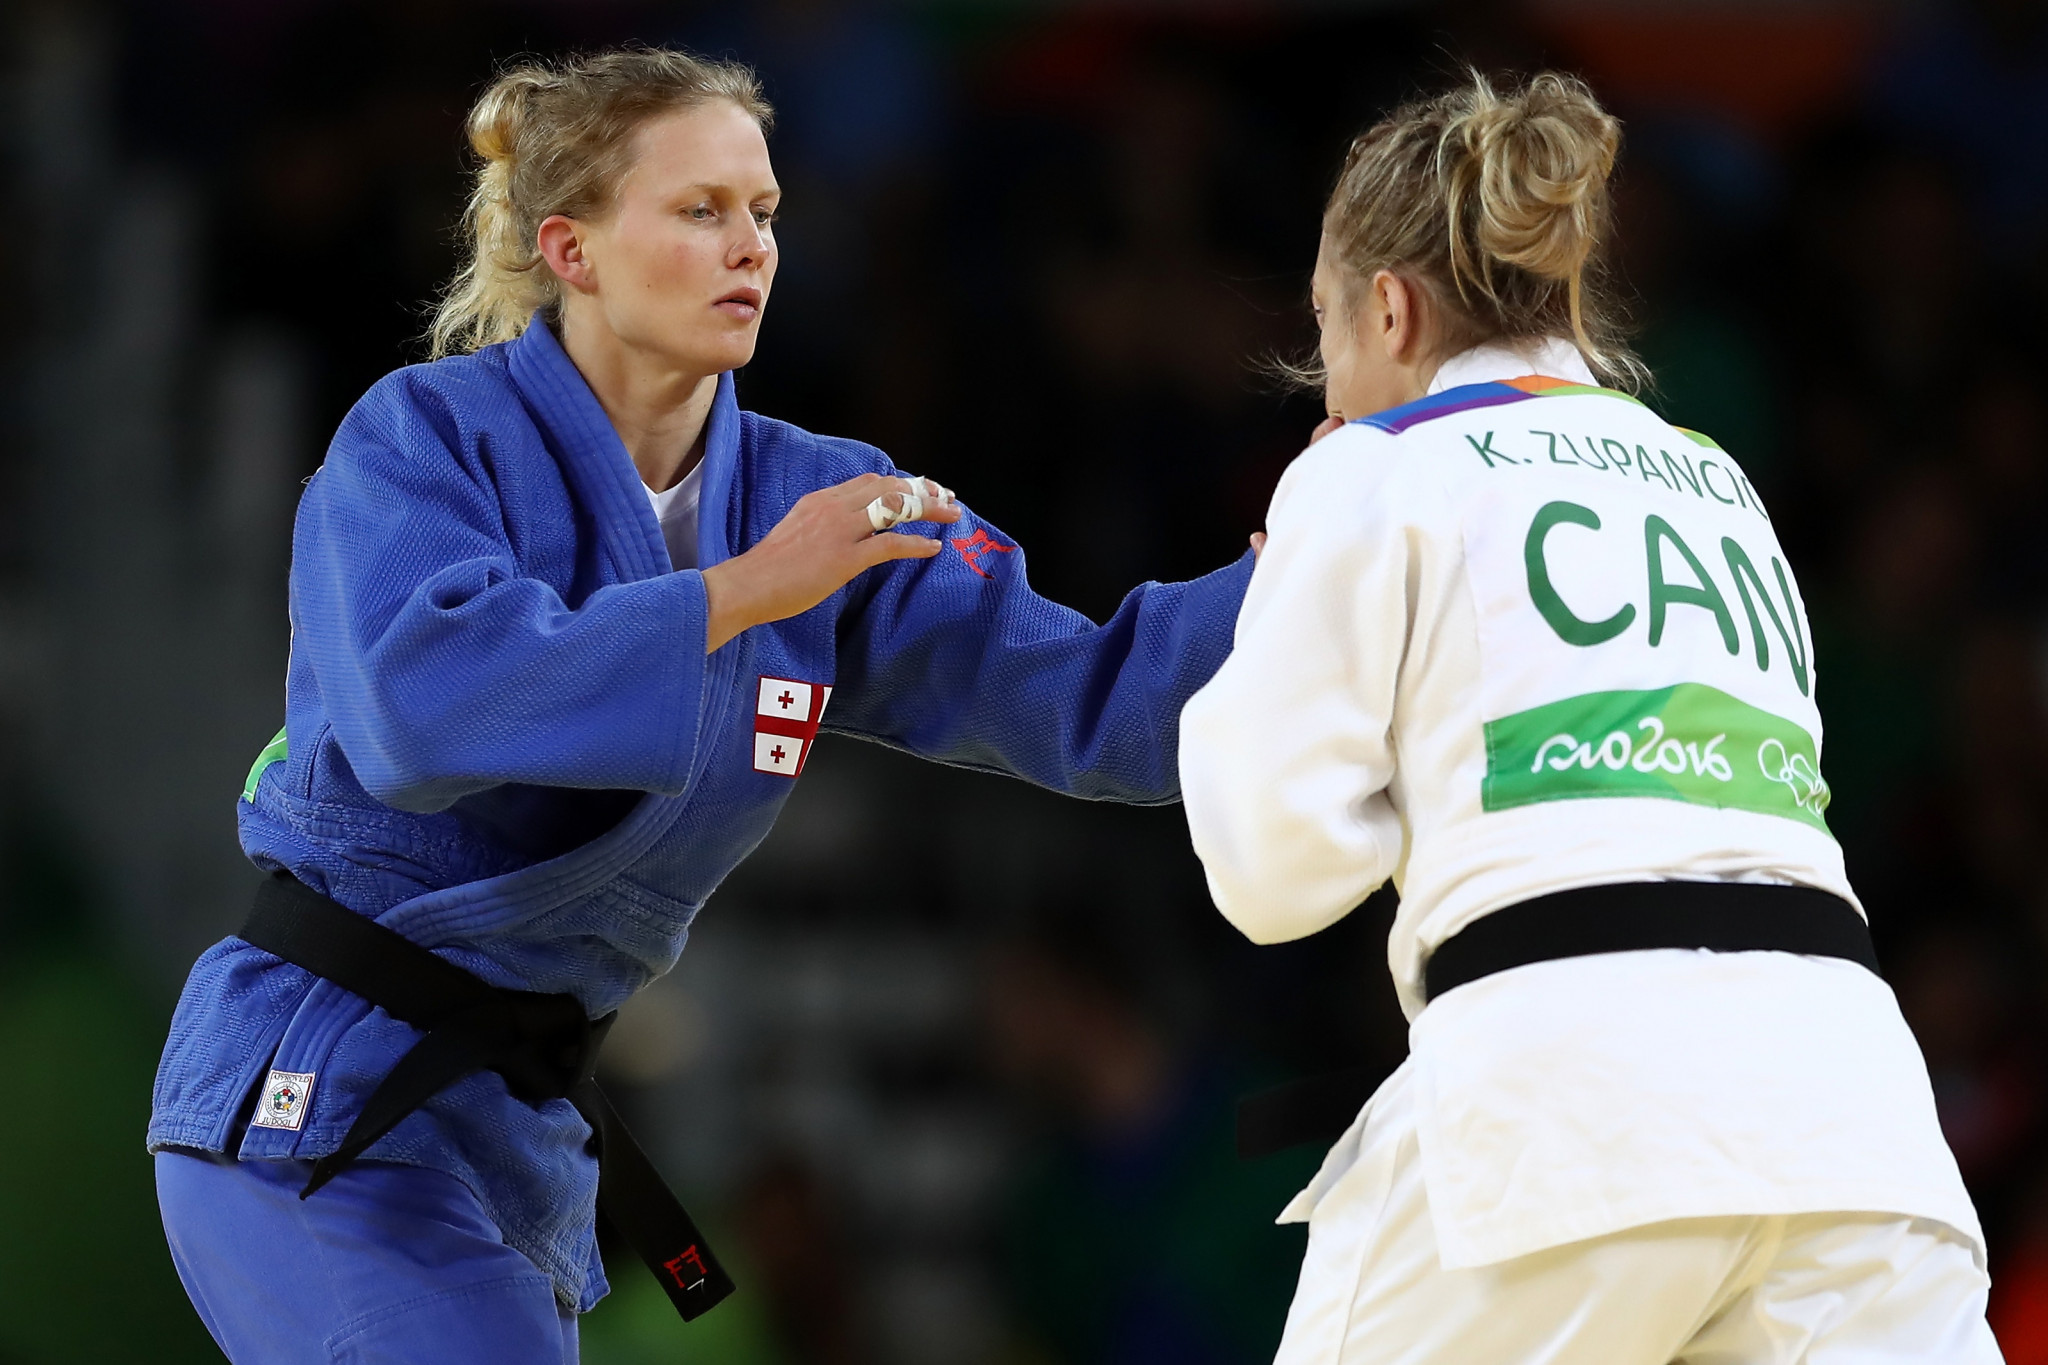 Olympian Stam to commentate on IBSA World Judo Championships